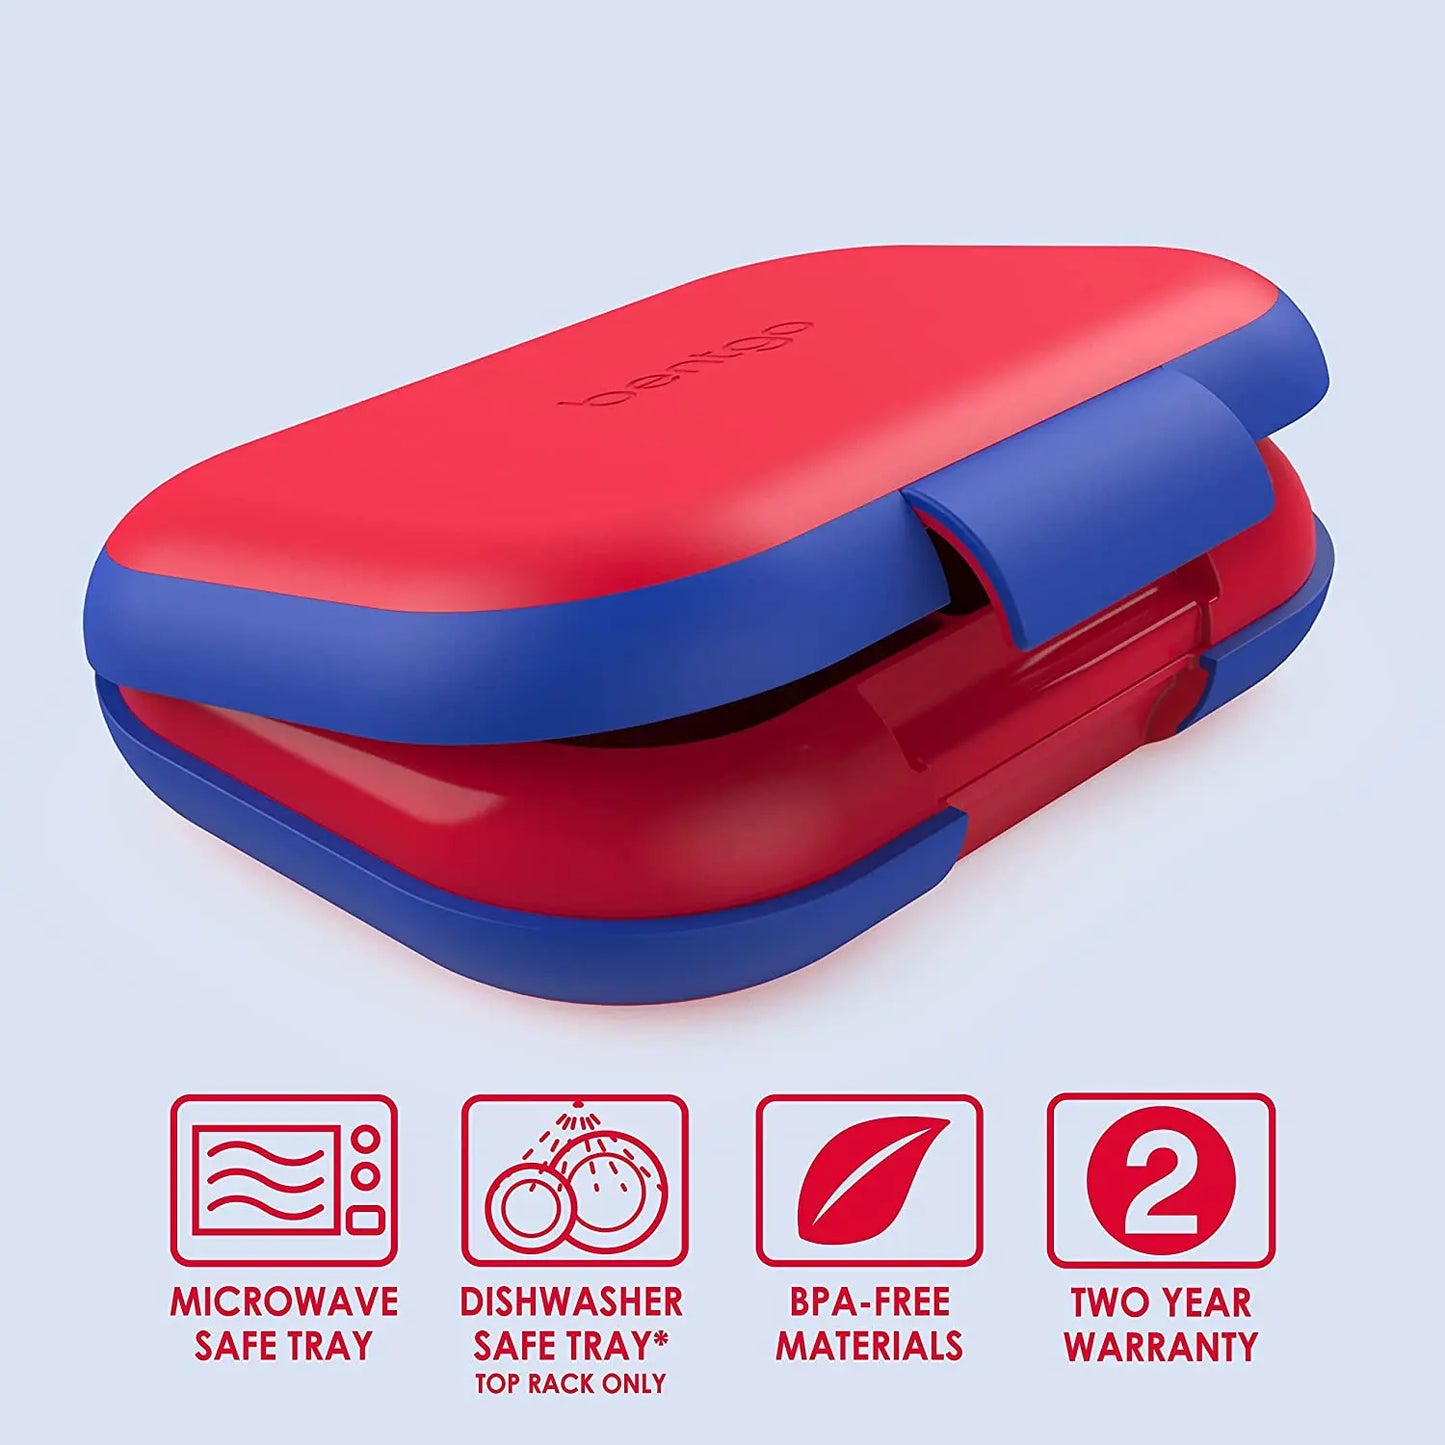 Bentgo® Kids Chill Lunch Box with Removable Ice Pack (Red) | GreenLifeHuman Emporium